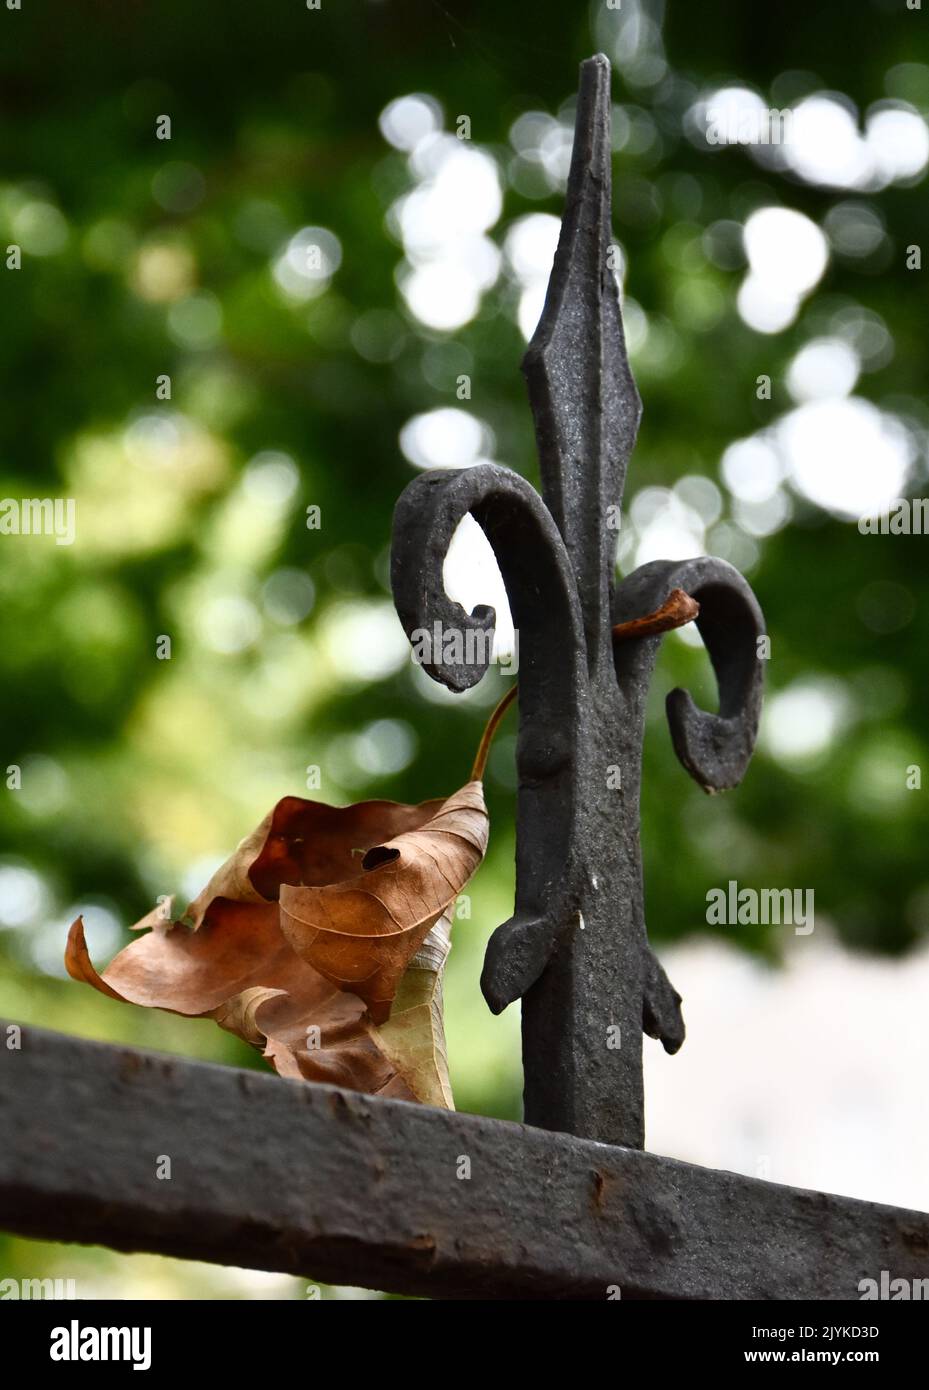 Dry Leaf On An Iron Fence Stock Photo